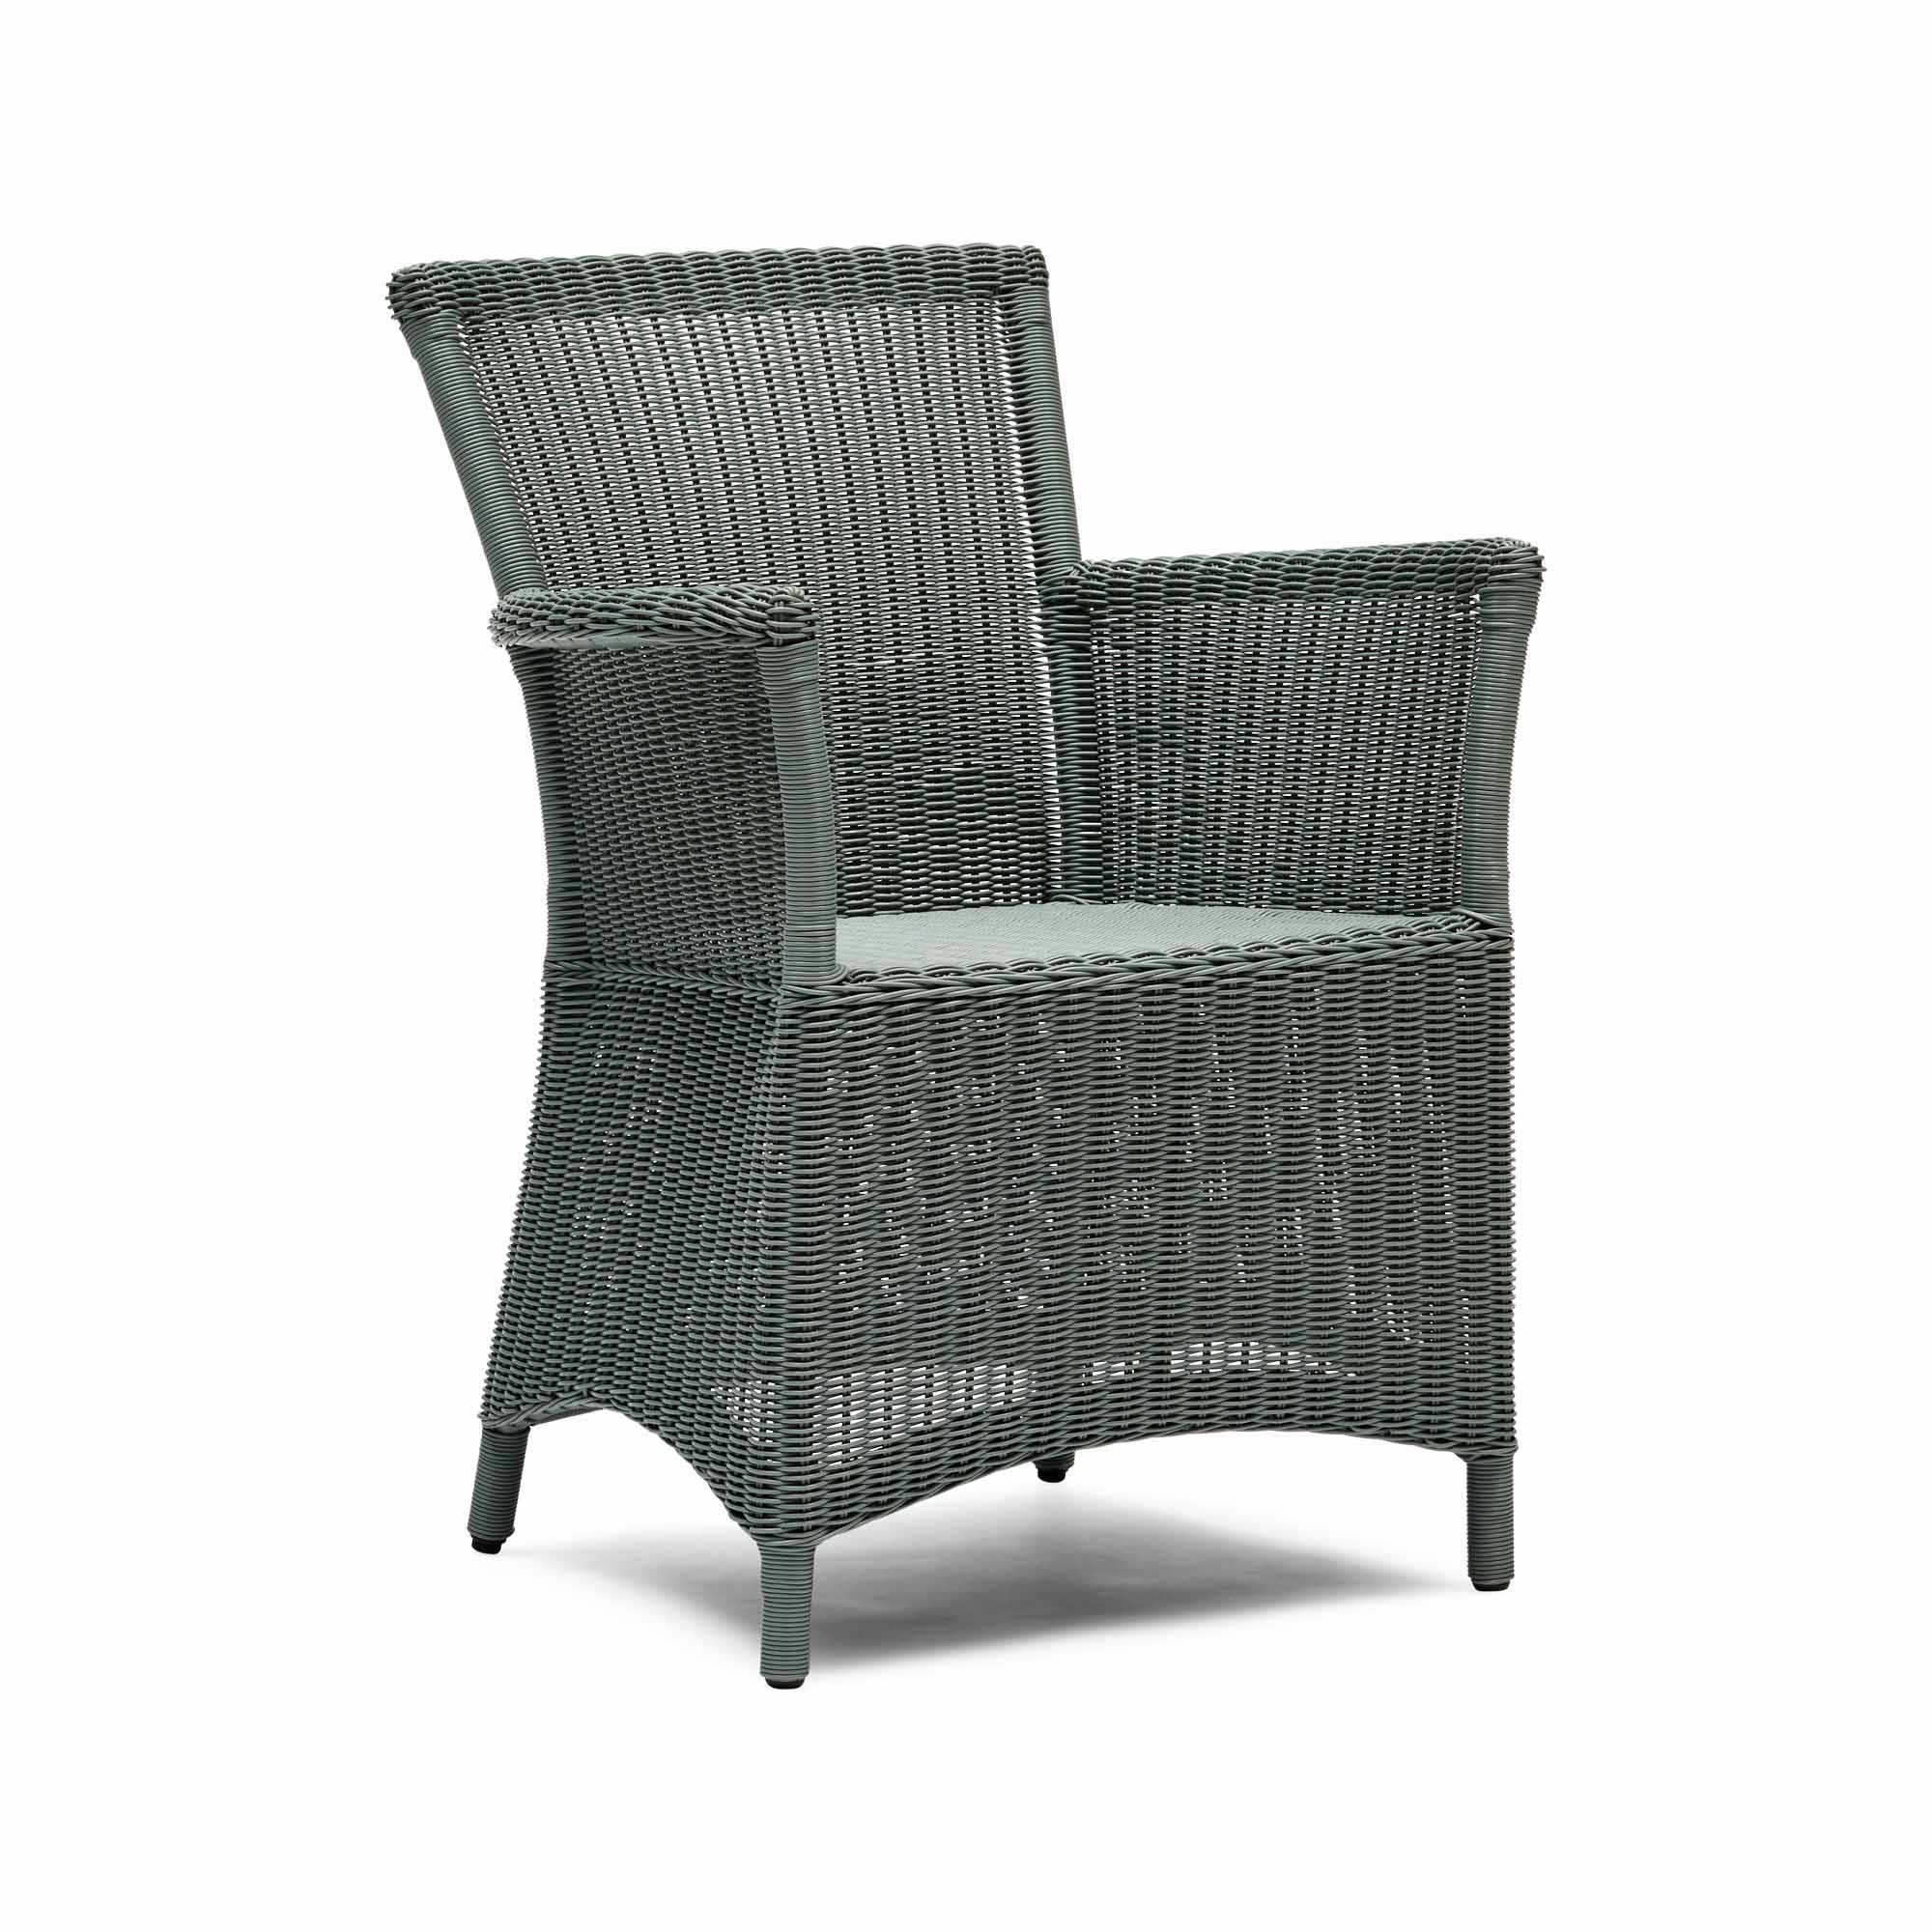 Capri Outdoor Chair Muted Teal